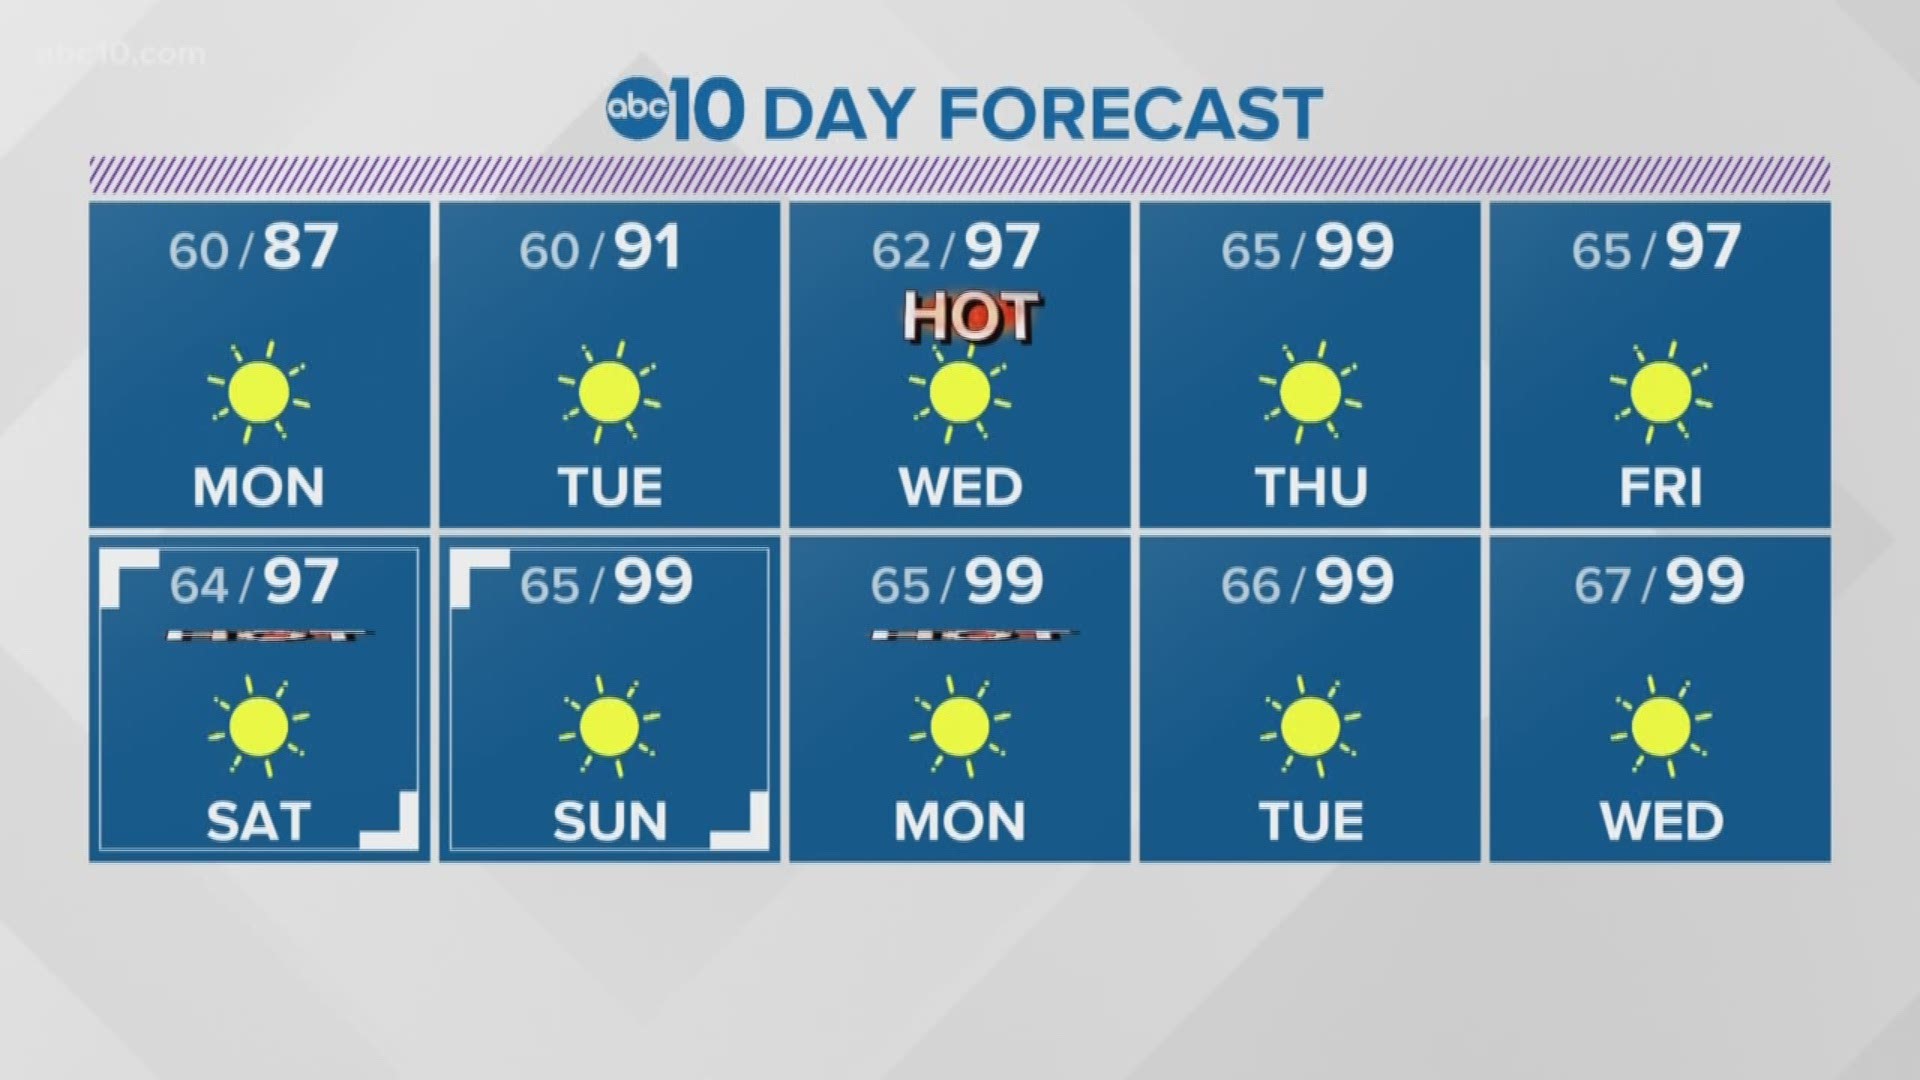 A wonderful end to the weekend with afternoon highs cooler than average.  After the weekend, expect another abrupt shift with our temperatures as the potential for triple-digit heat returns mid-week.